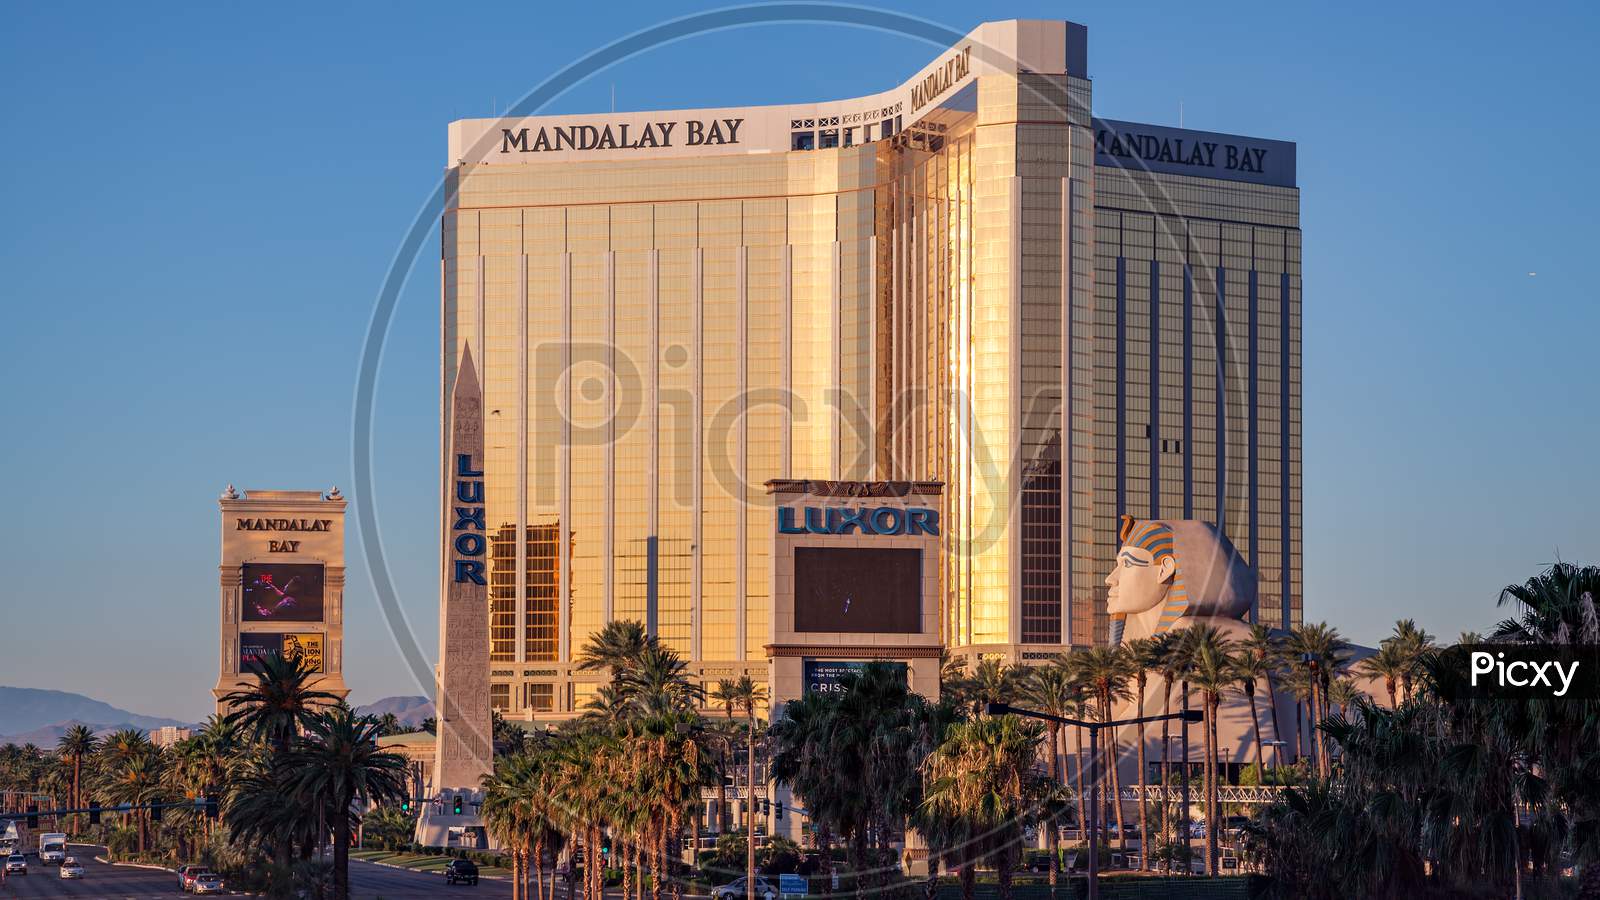 Las Vegas, Nevada/Usa - August 1 : View Of The Mandalay Bay Hotel In Las Vegas Nevada On August 1, 2011. One Unidentified Person